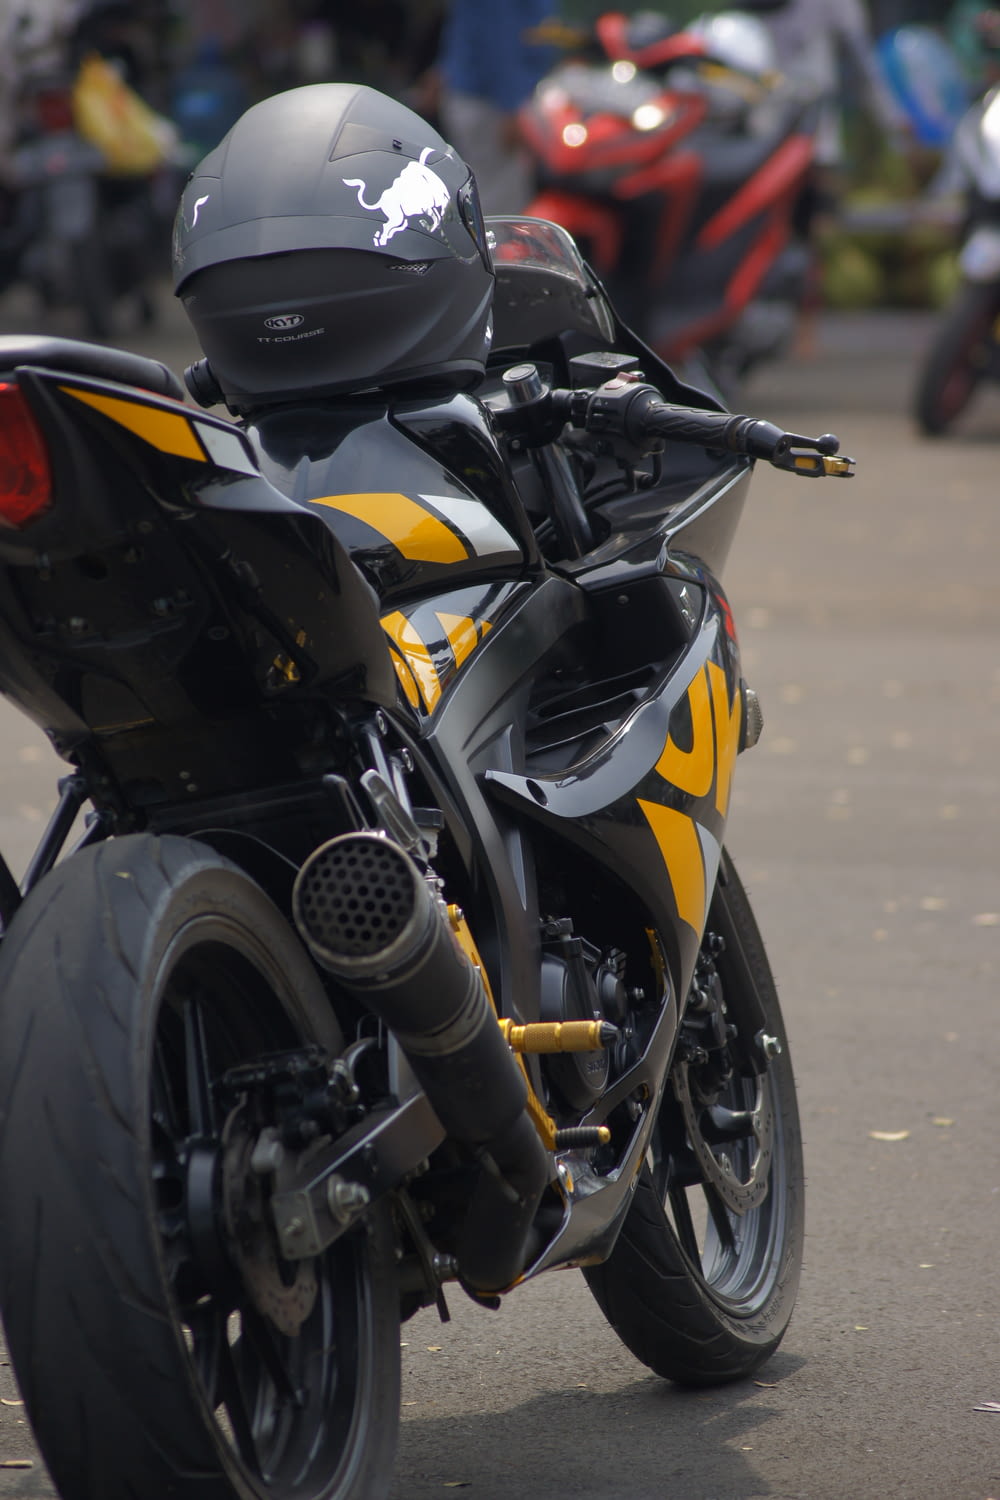 a yellow and black motorcycle parked on a street